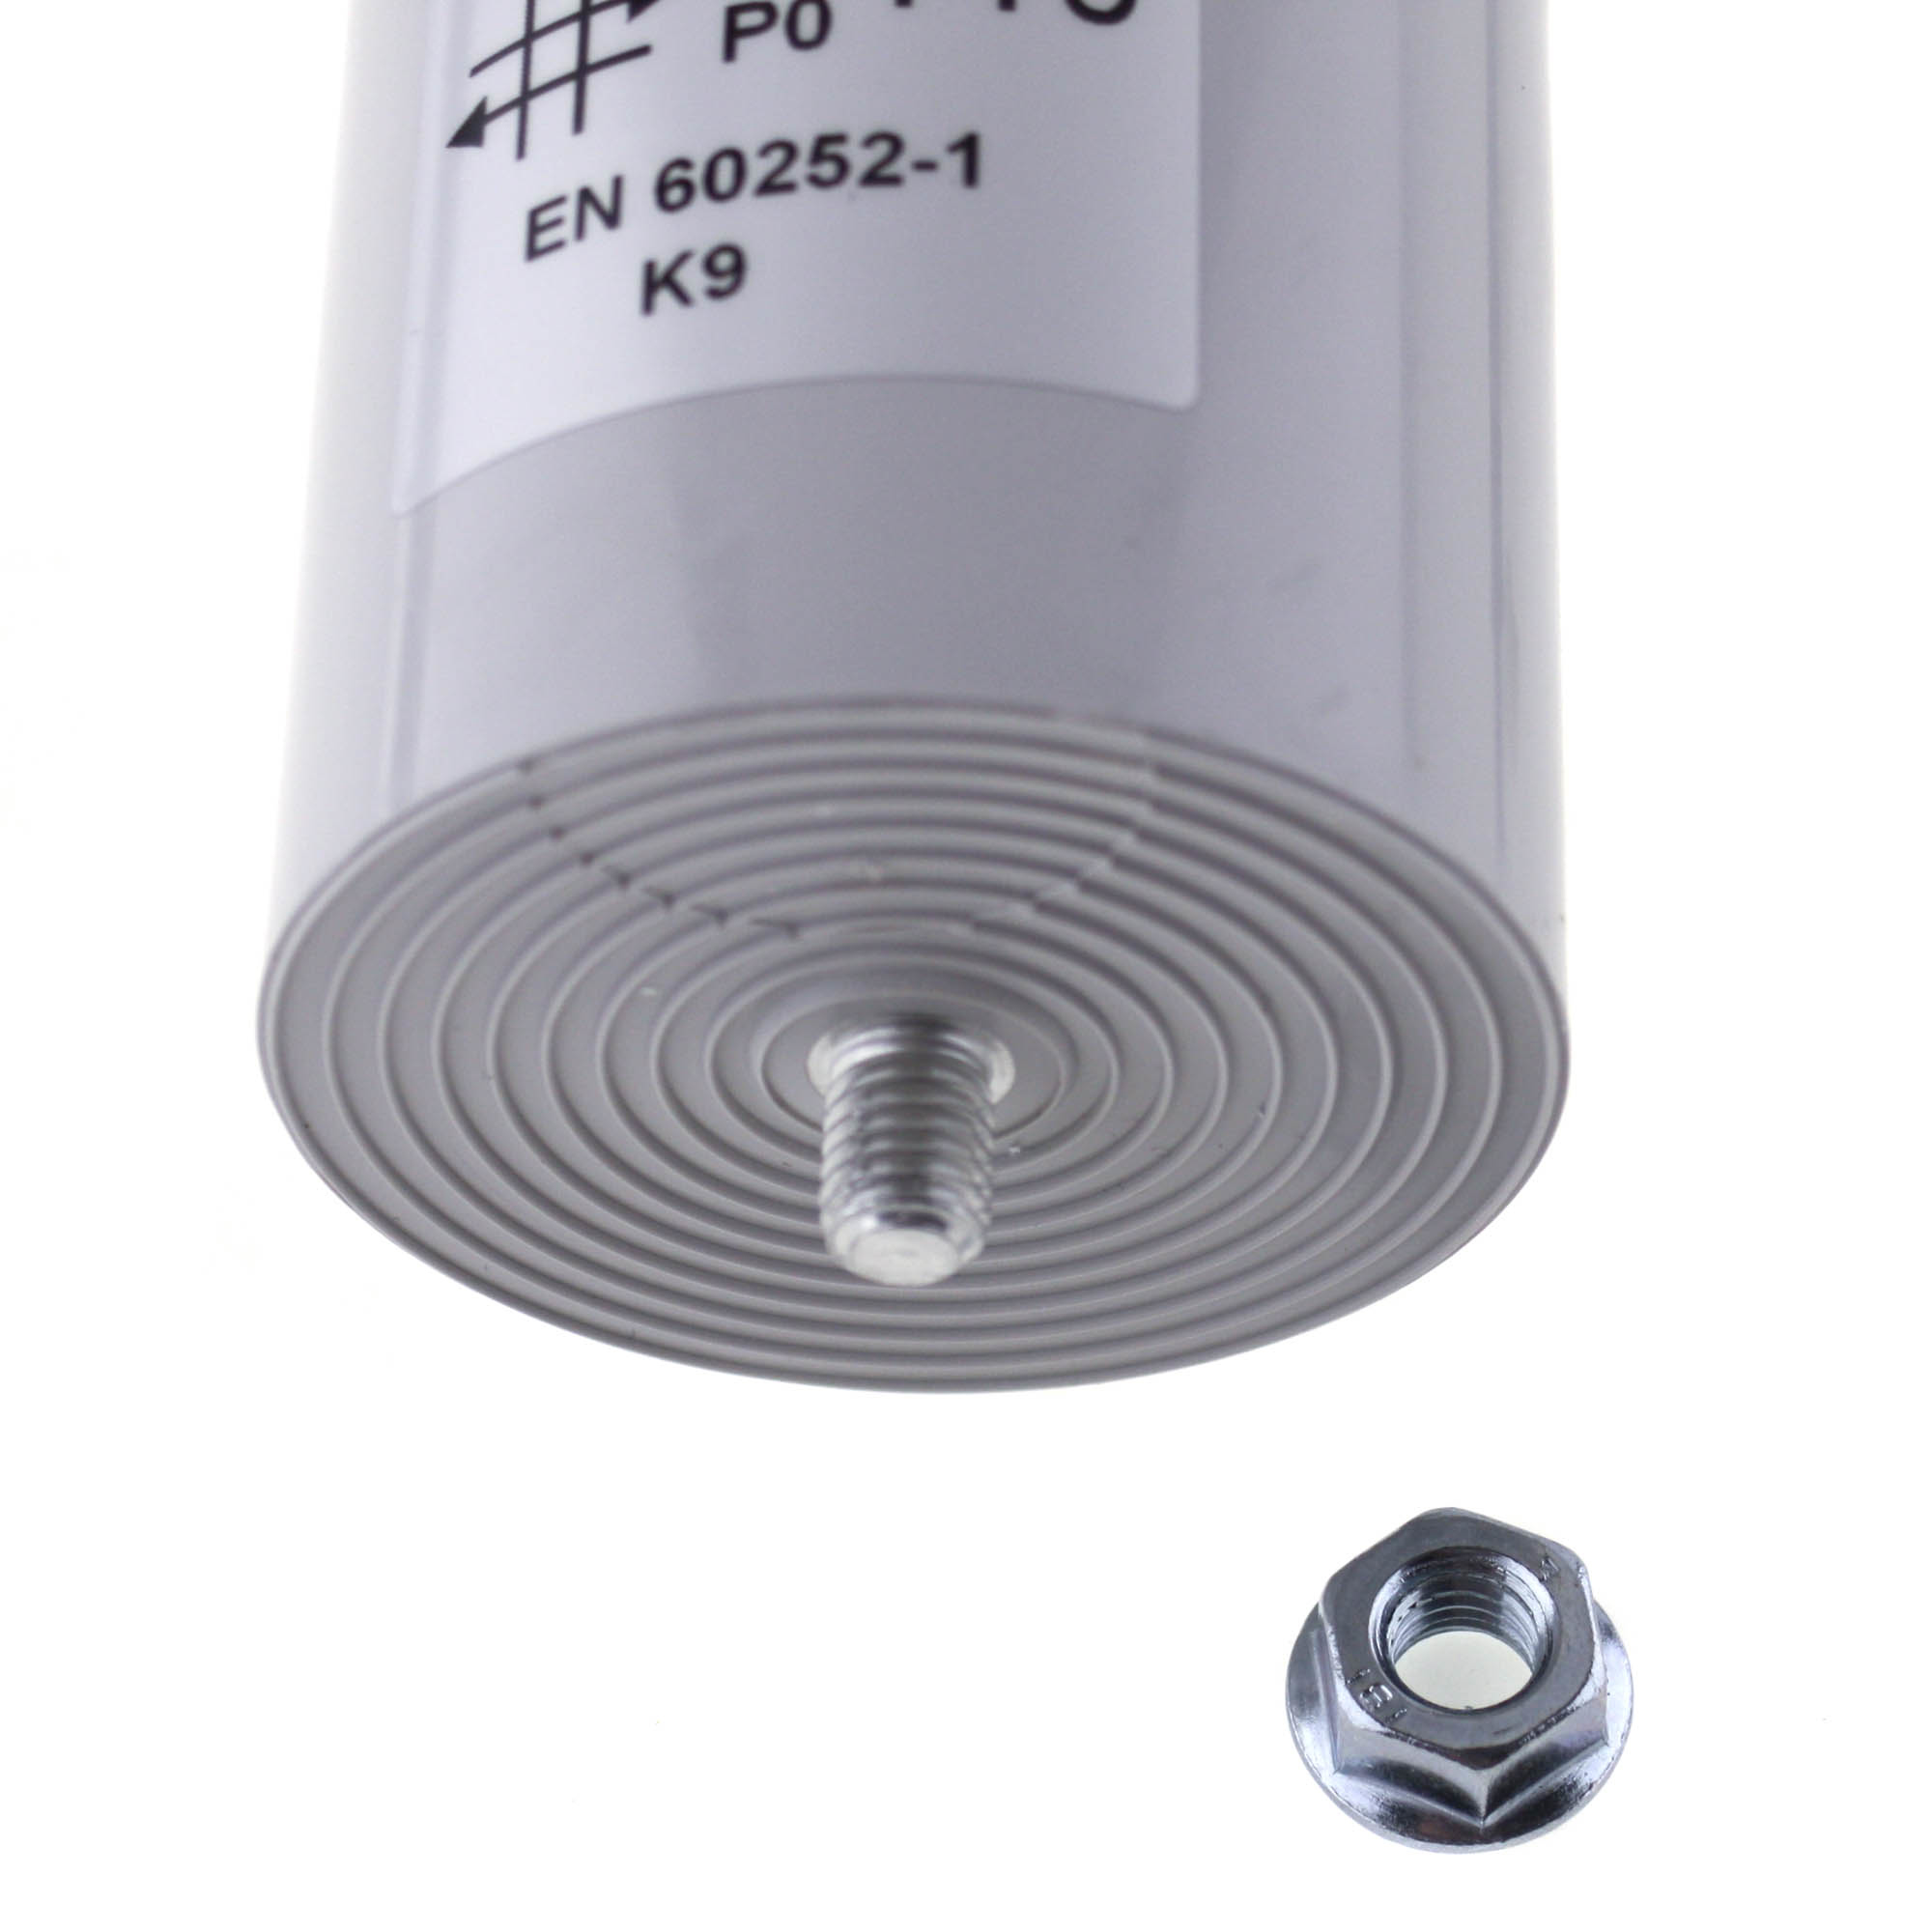 Motor Capacitor 110uF-400V, 60x119mm, cable connection